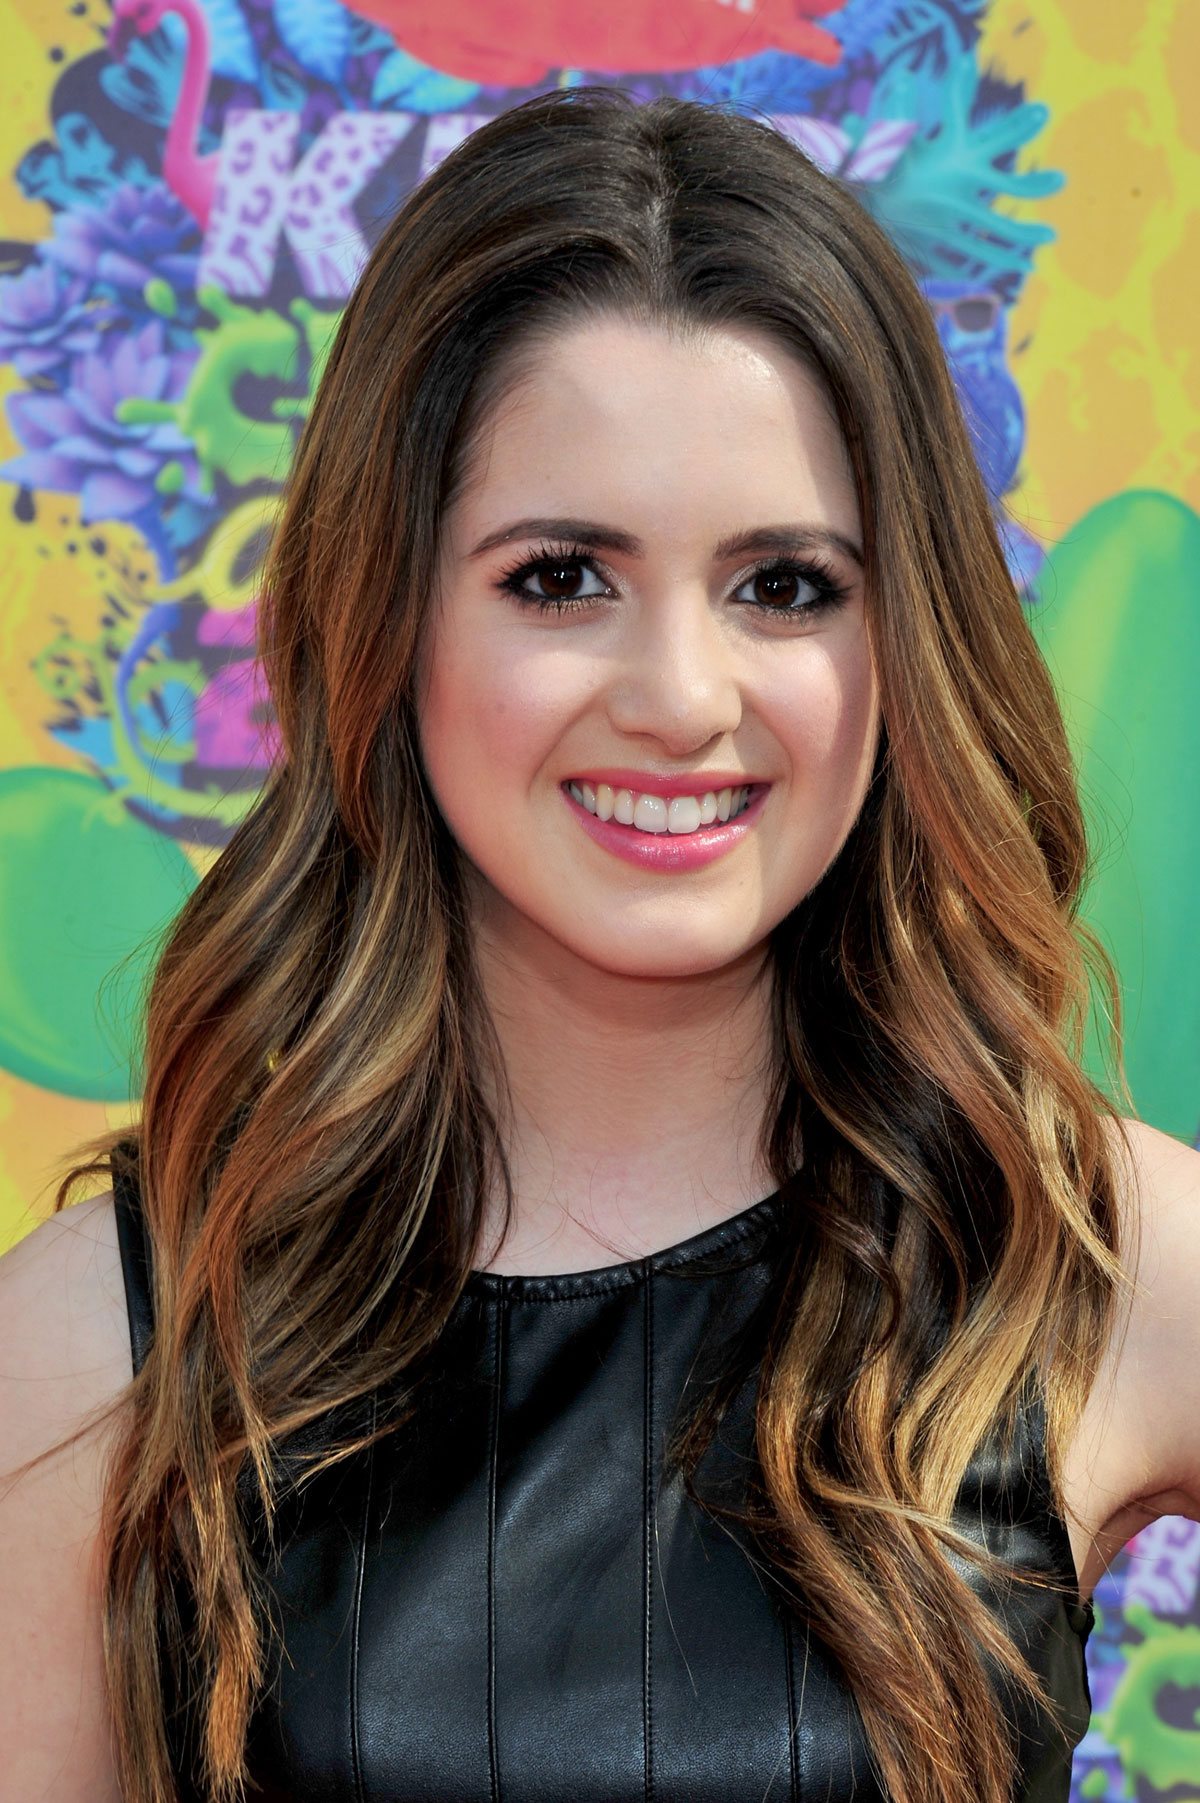 Laura Marano attends Nickelodeon’s 27th Annual Kids Choice Awards